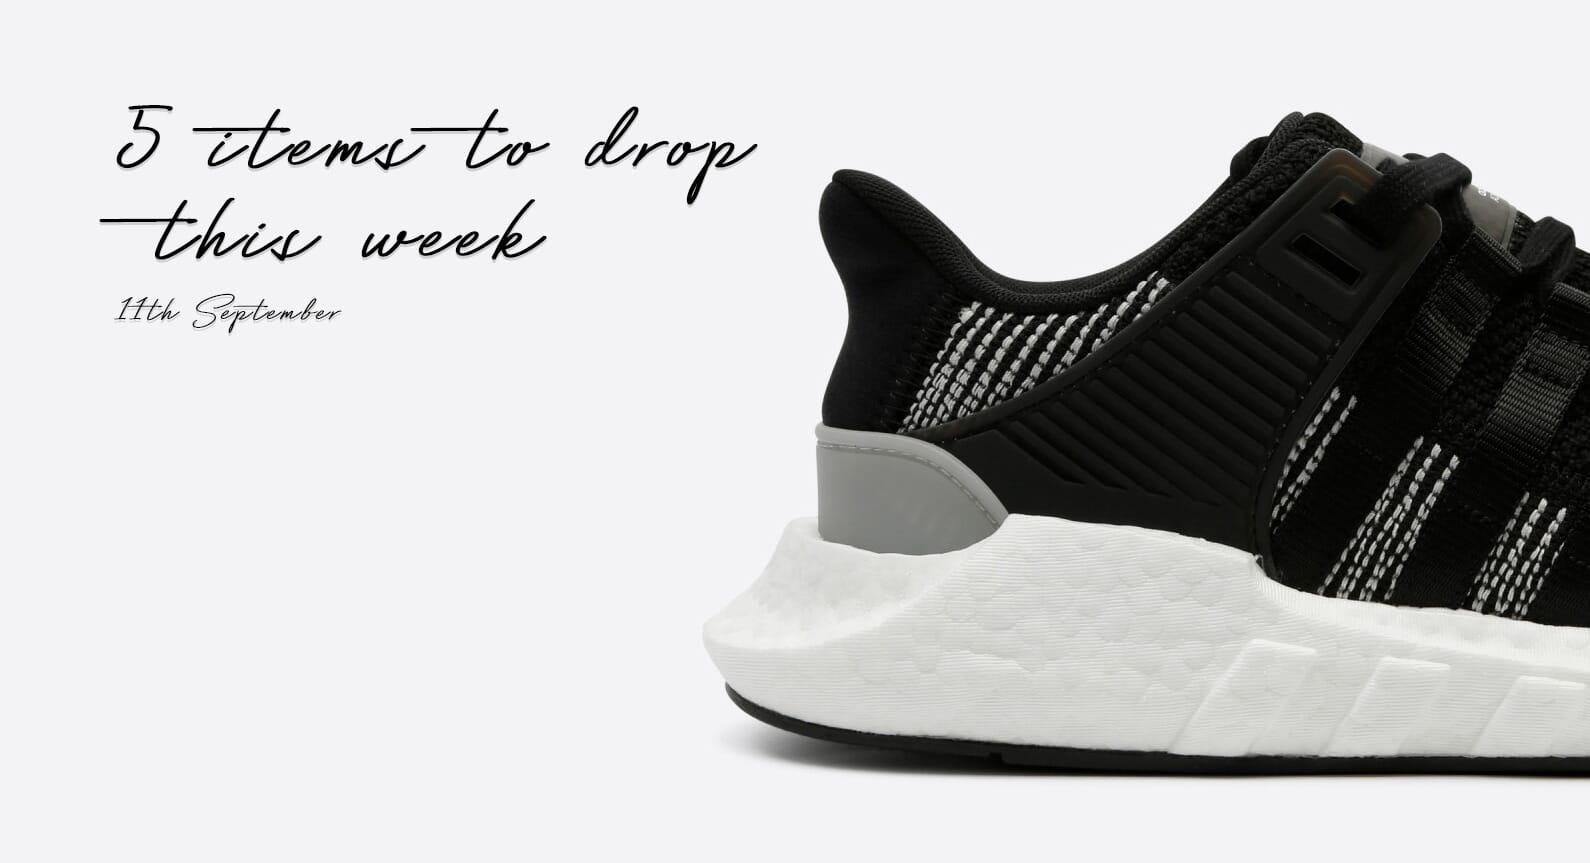 The Top 5 Items To Drop This Week